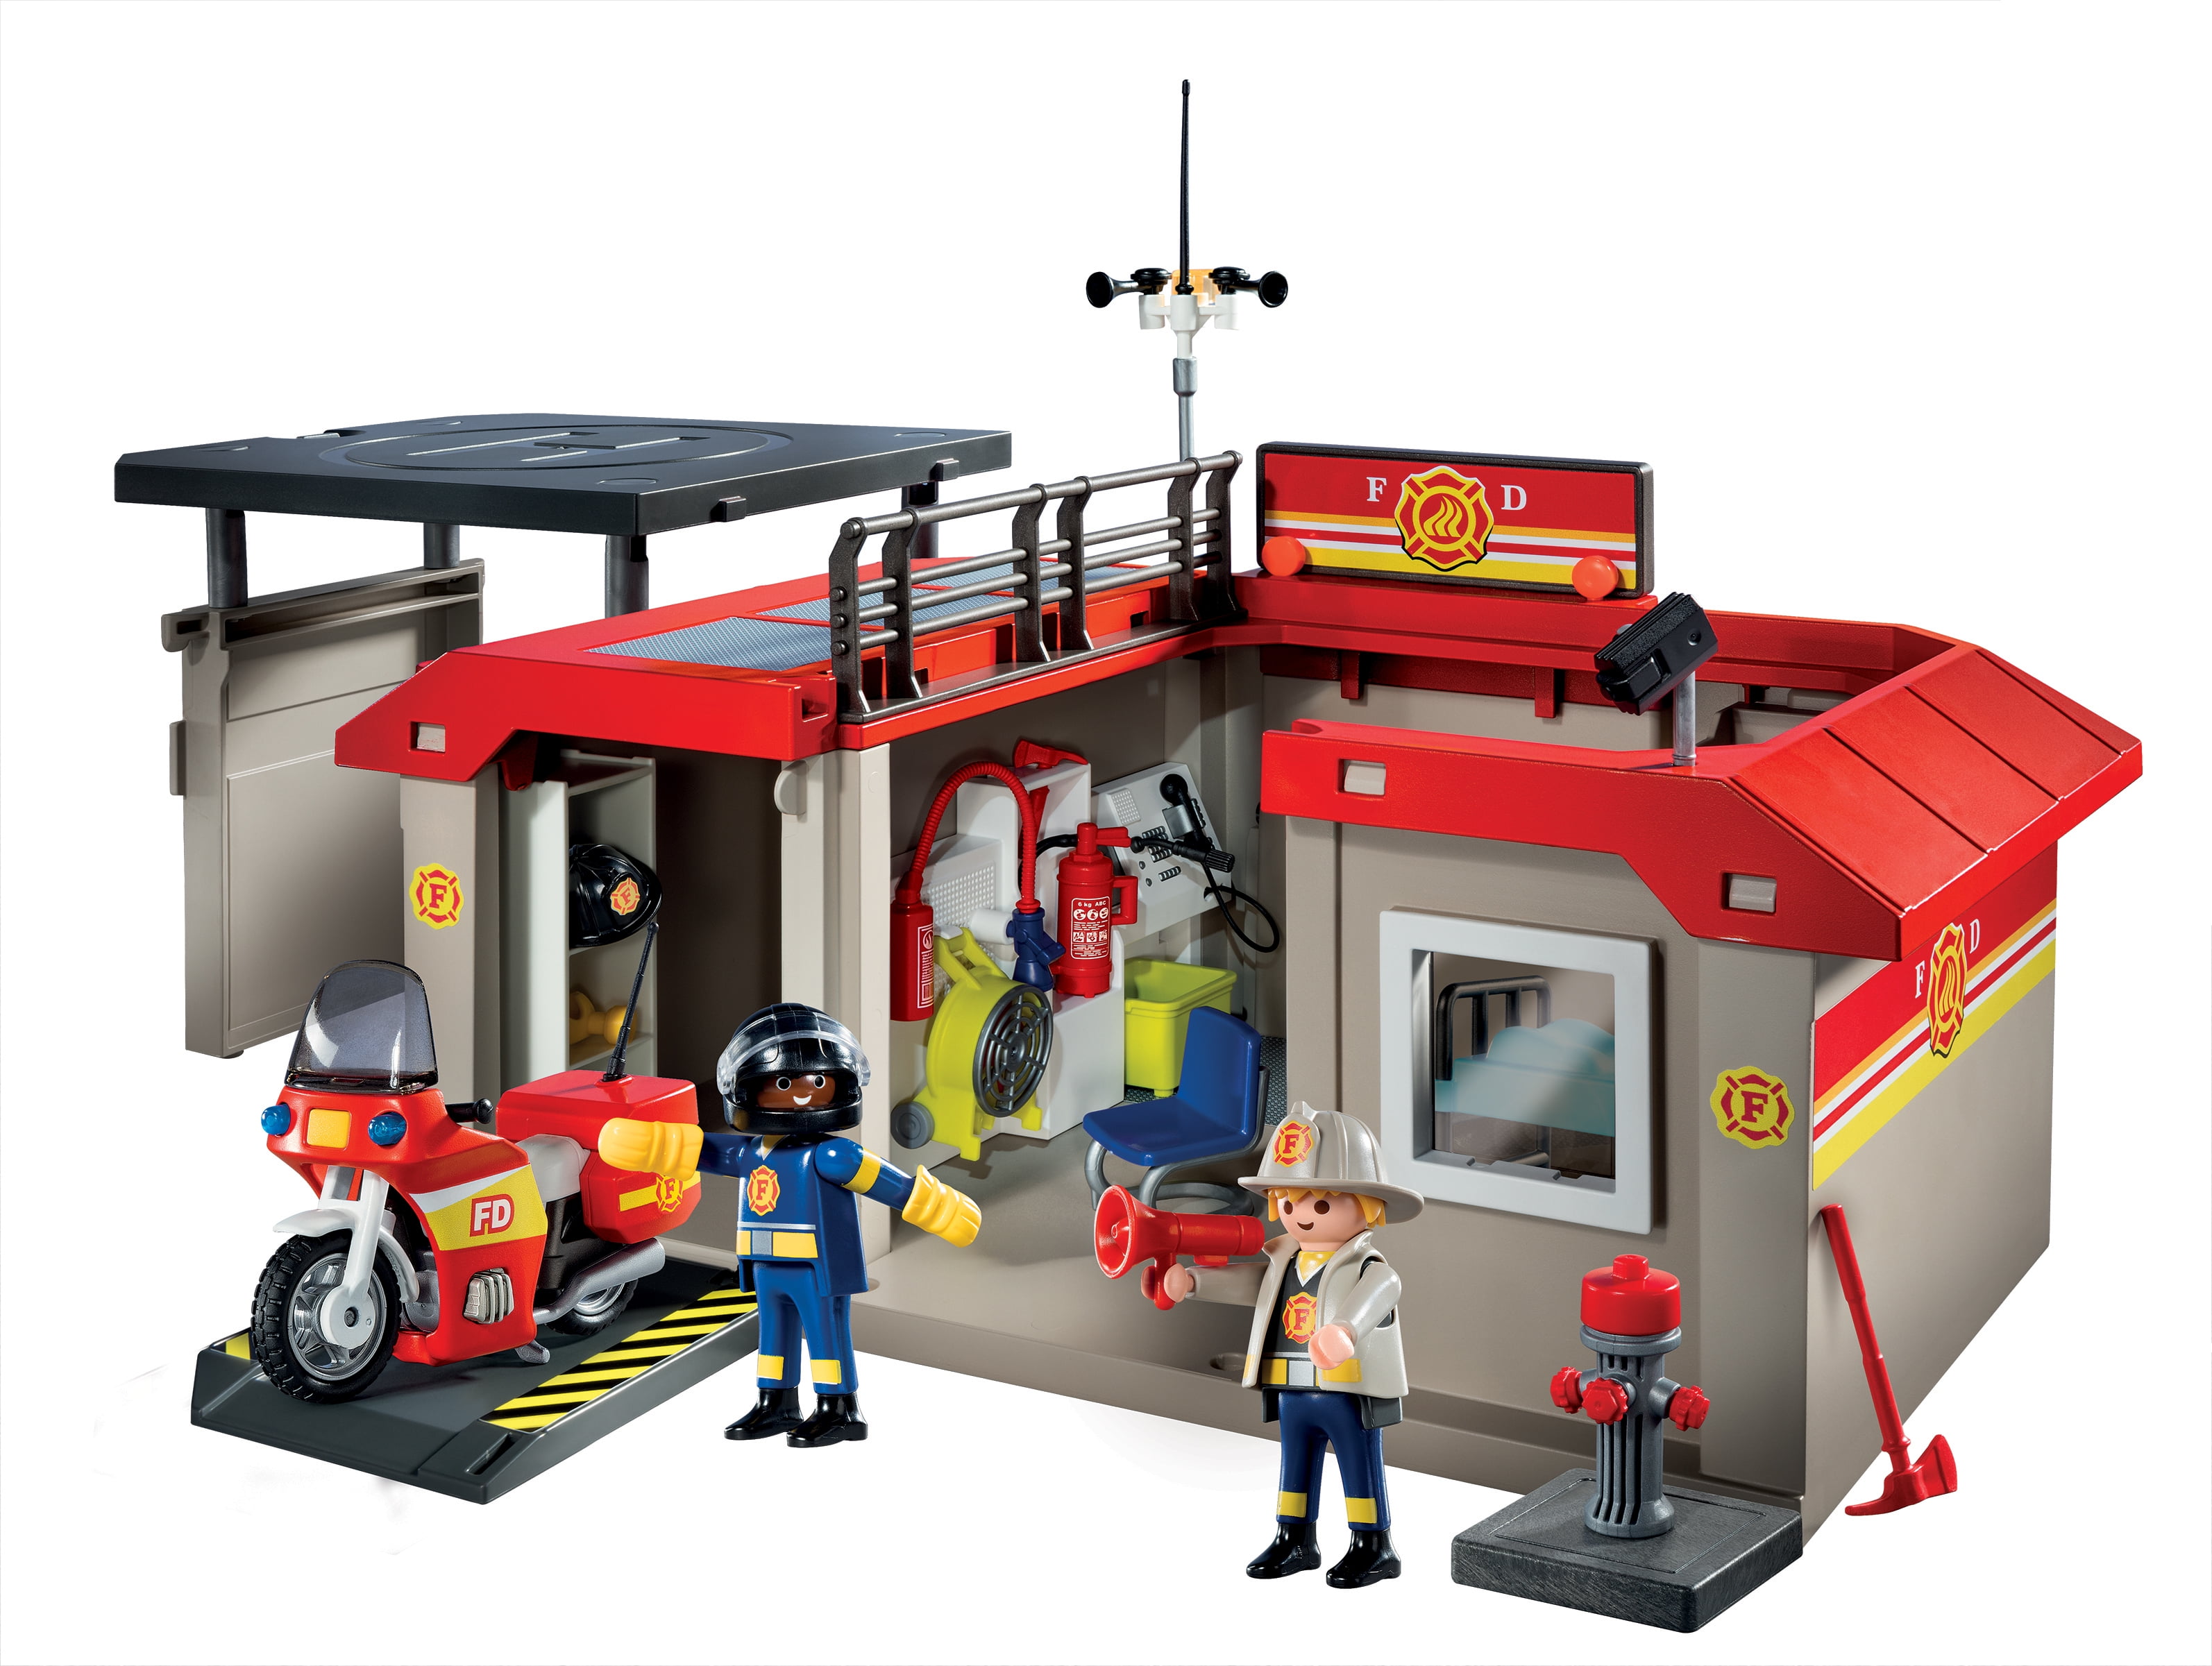 Playmobil firefighters-pan roof red double 9x8,5cm barracks 3175 g406 